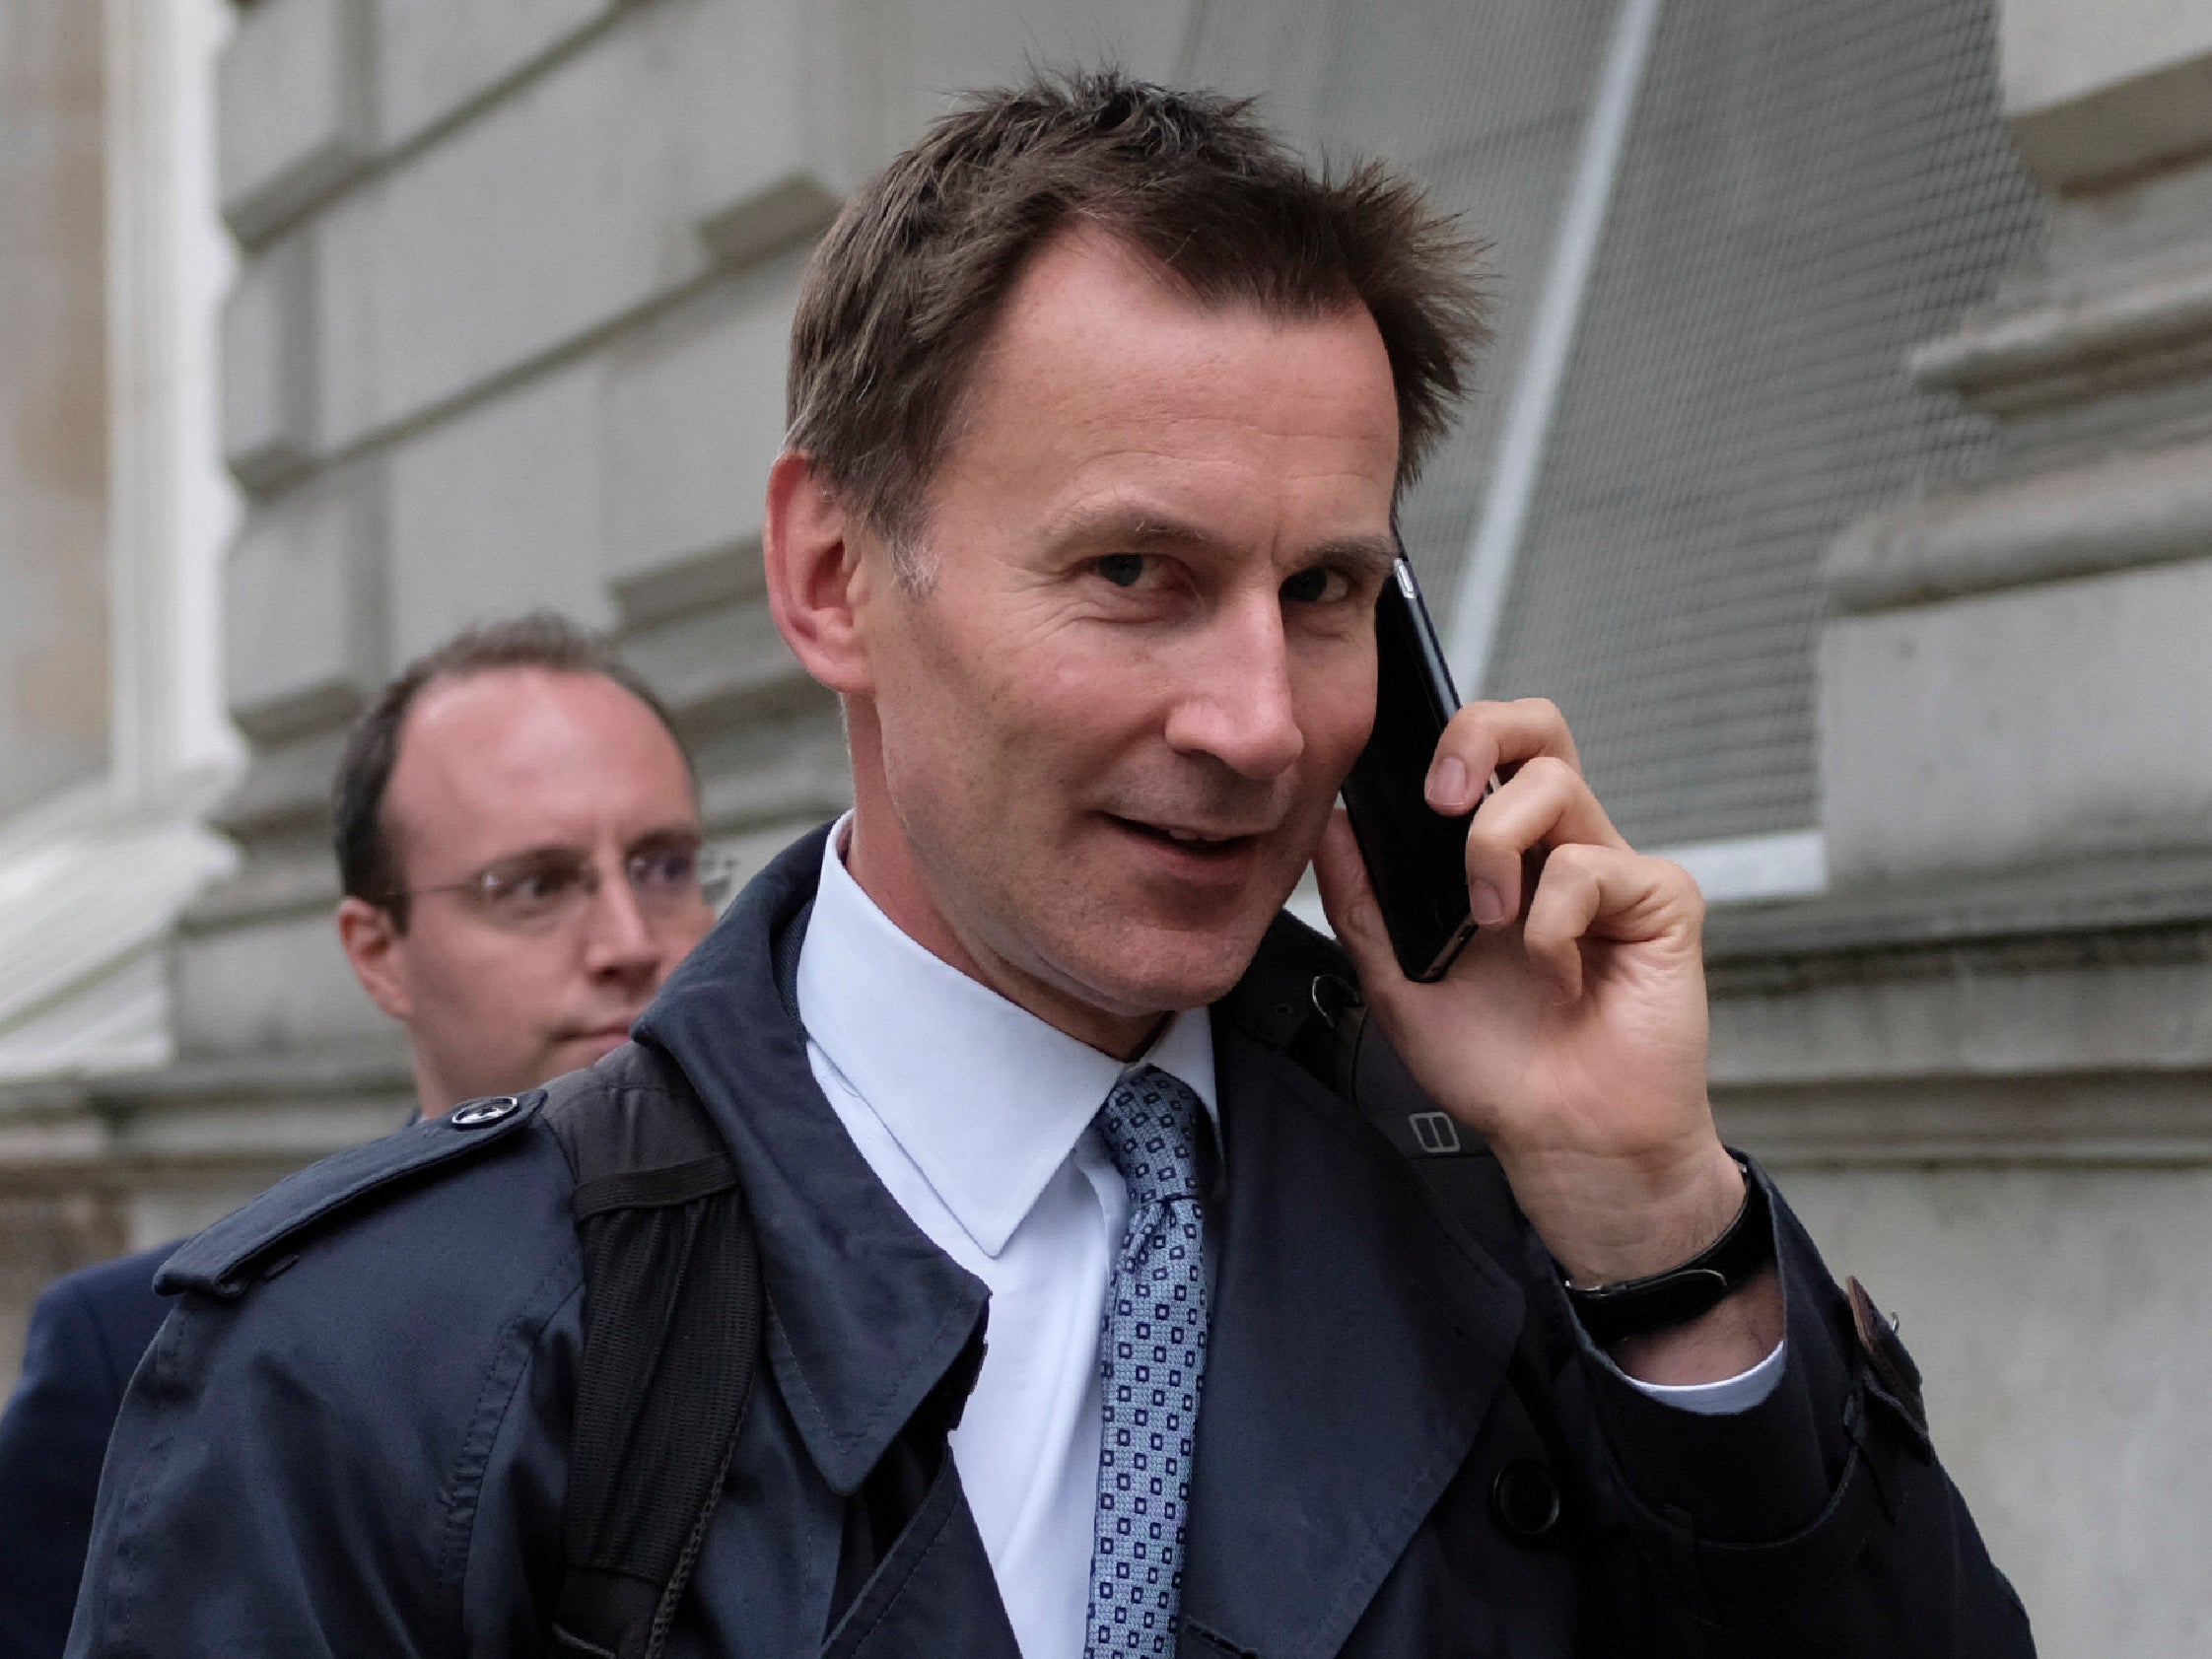 Health Secretary Jeremy Hunt arrives at Downing Street ahead of a Cobra meeting to assess progress on dealing with the ransomware cyber attack that affected NHS facilities and disrupted care at hospitals in the UK